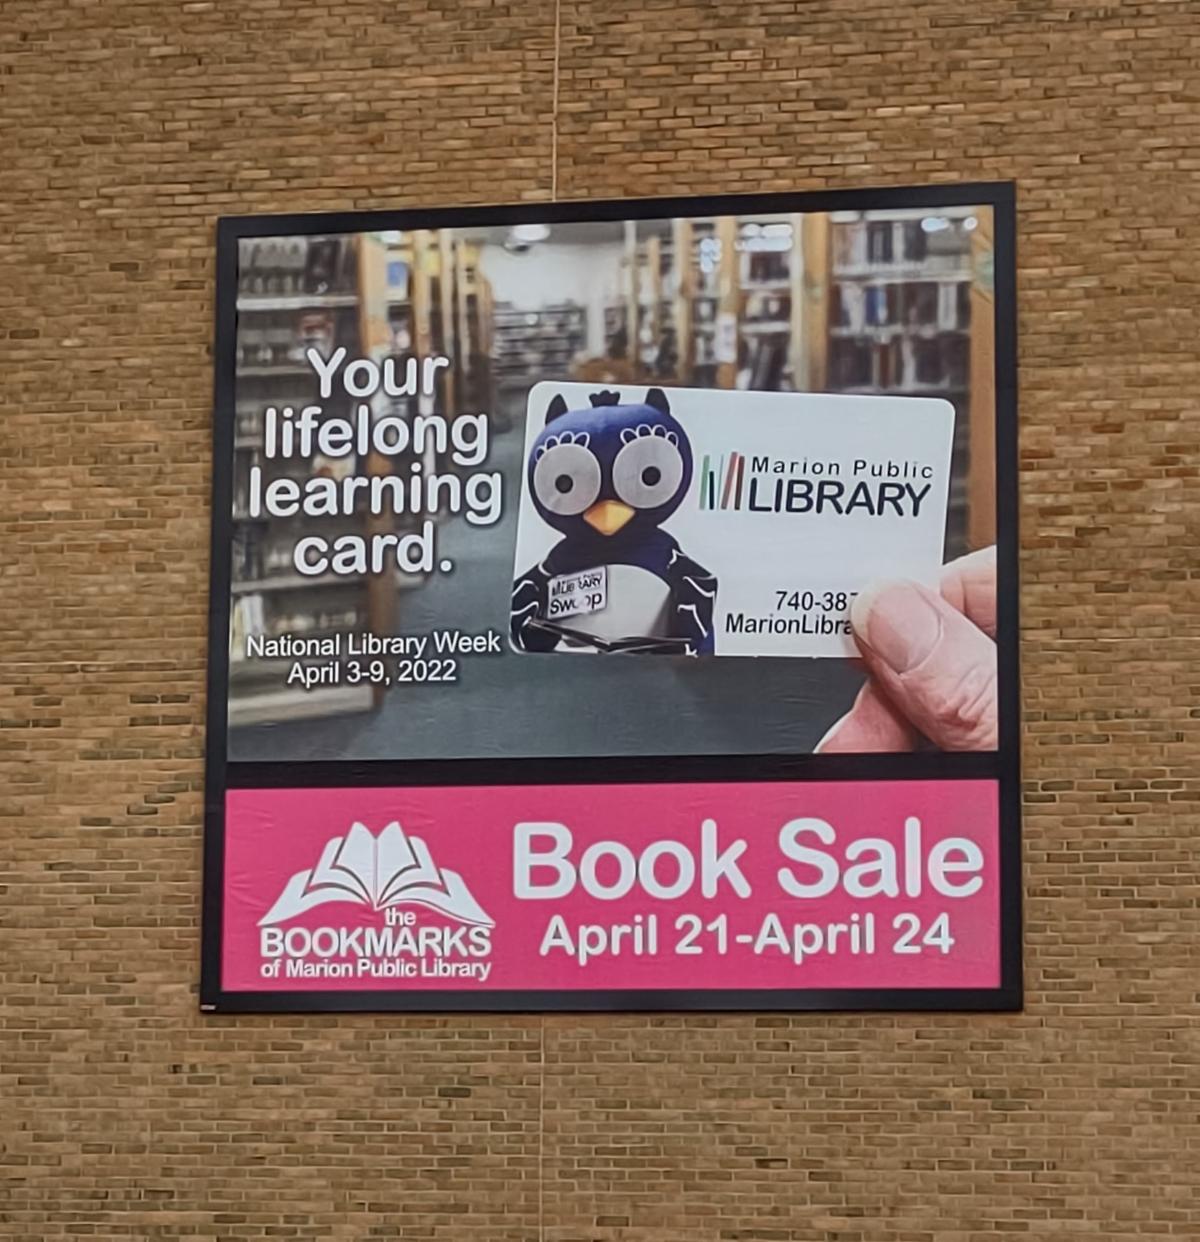 Marion_Public_Library_Lind_BannerFrame_Hinge_booksale_marketing_message Does Your Banner System Let Your Client Keep Up With Their Marketing Calendar? Lind's Does.